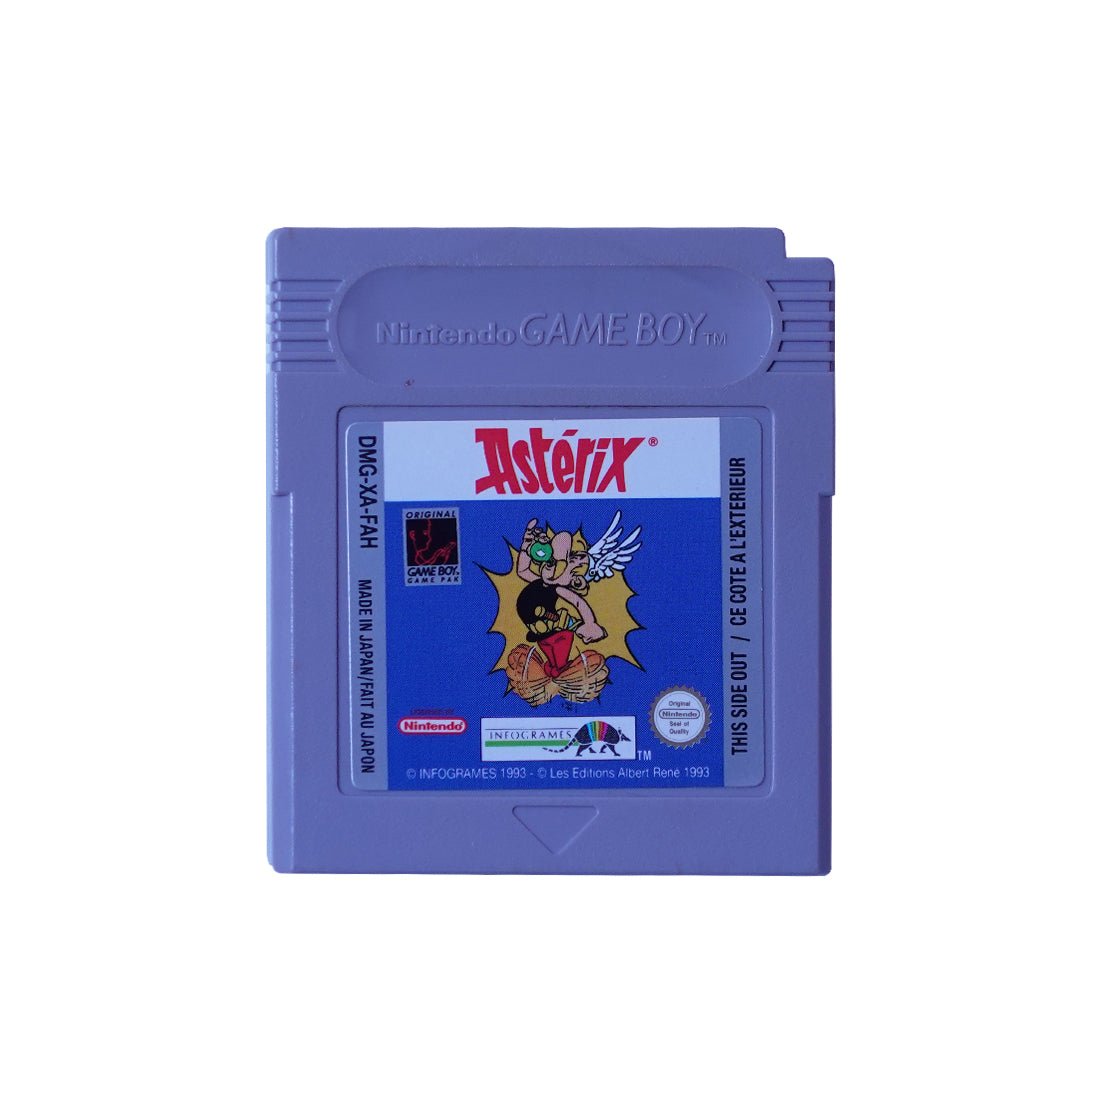 (Pre-Owned) Asterix - Gameboy Classic - ريترو - Store 974 | ستور ٩٧٤